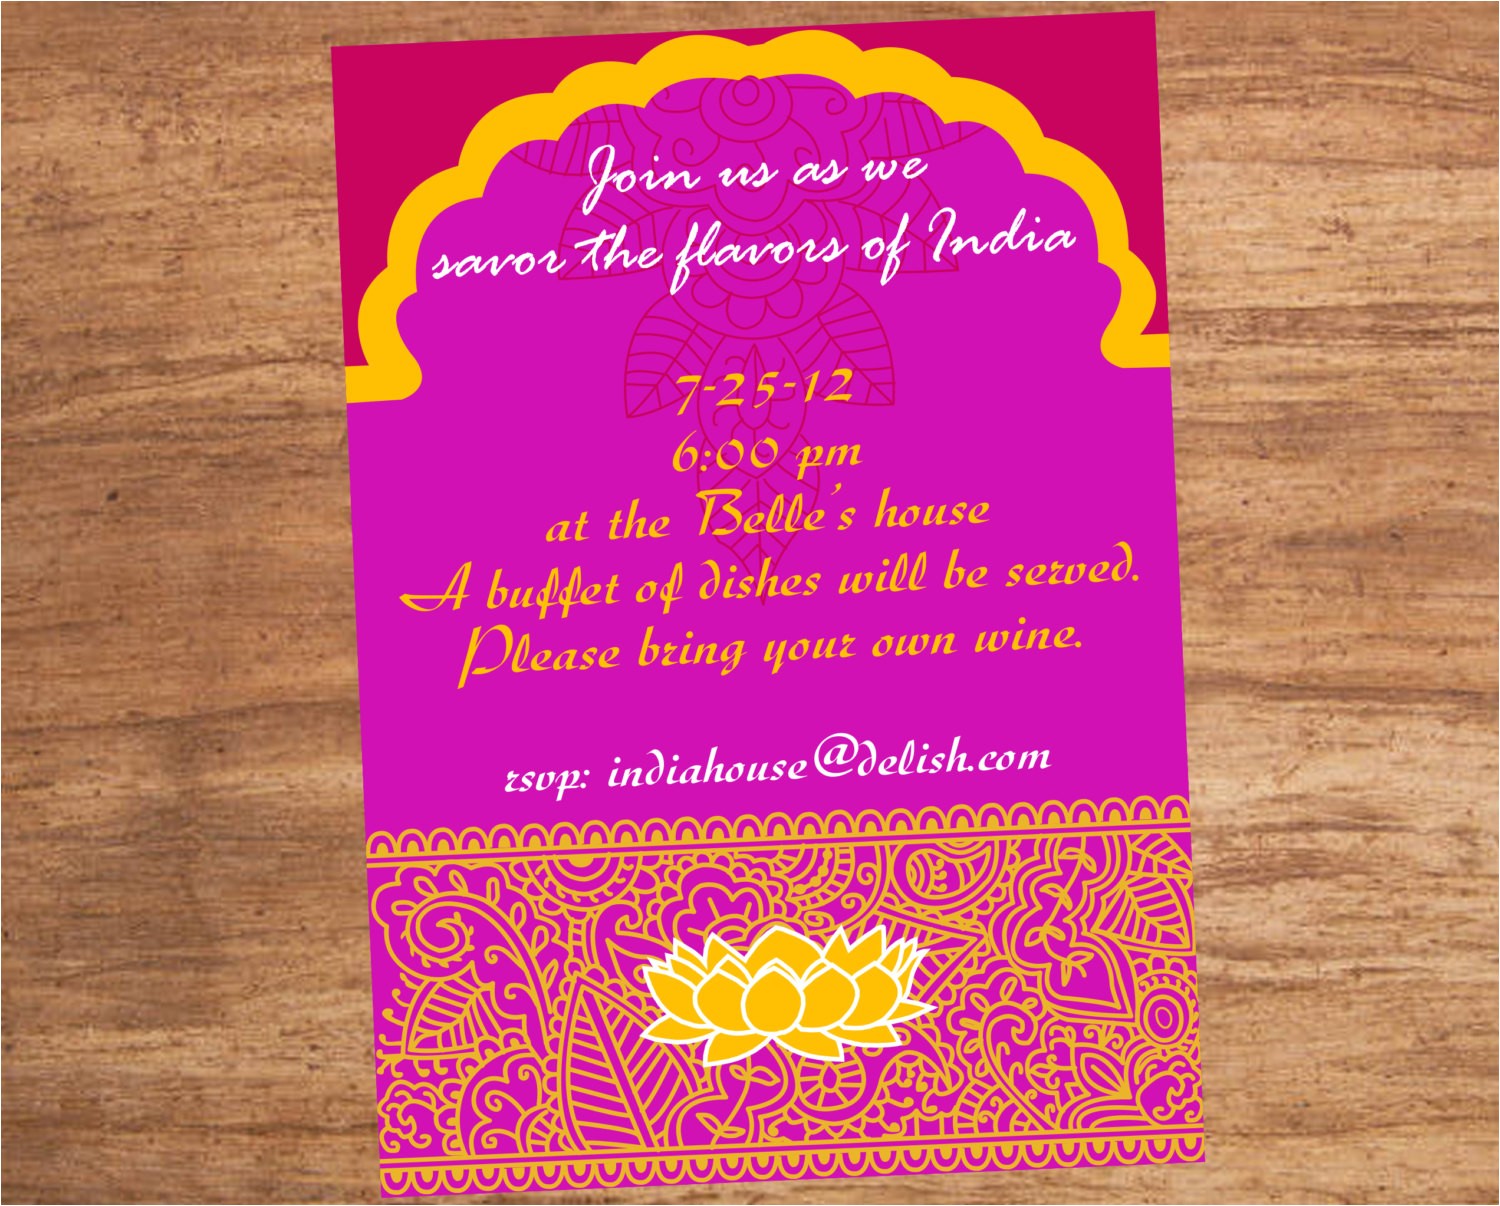 2nd Birthday Invitation Wording Indian Style India Indian Food Party Invitation